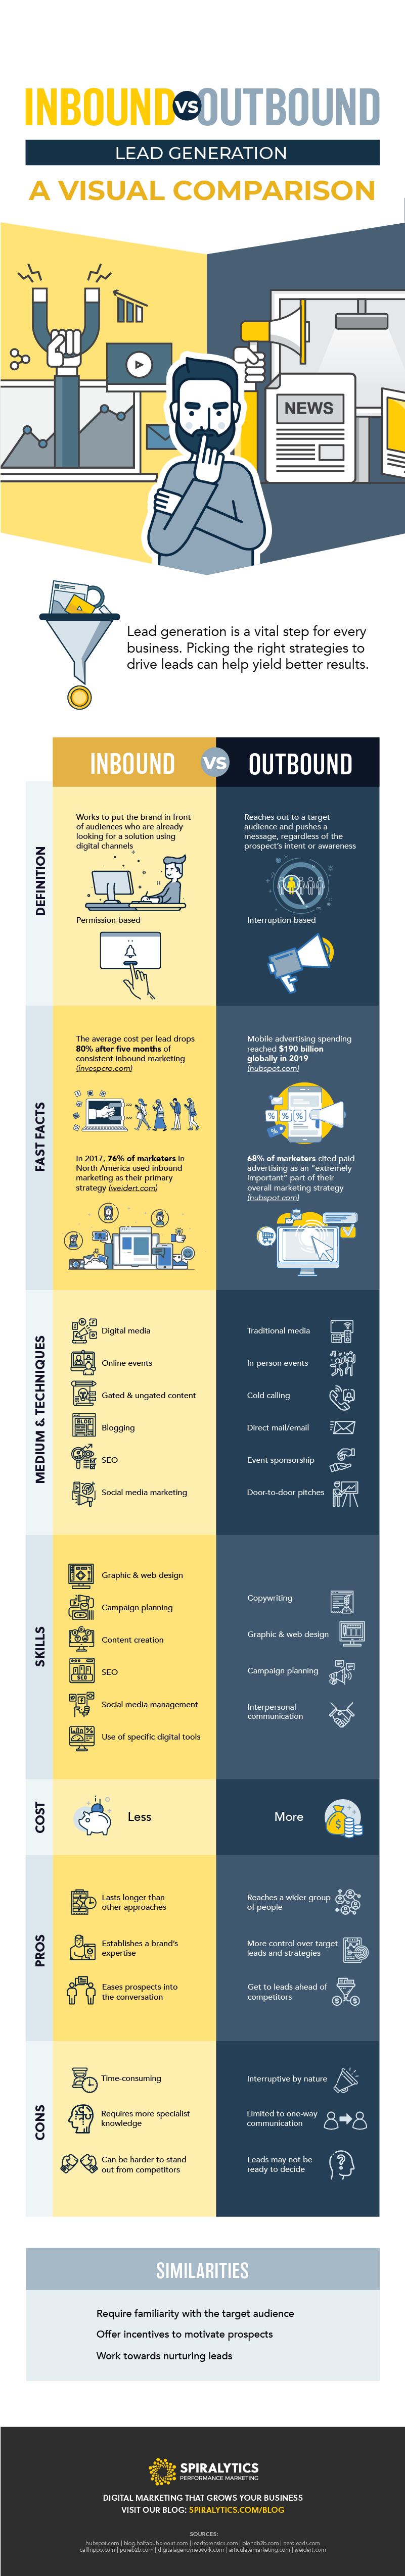 Infographic Inbound Vs Outbound Lead Generation A Visual Comparison 1, Industry Today